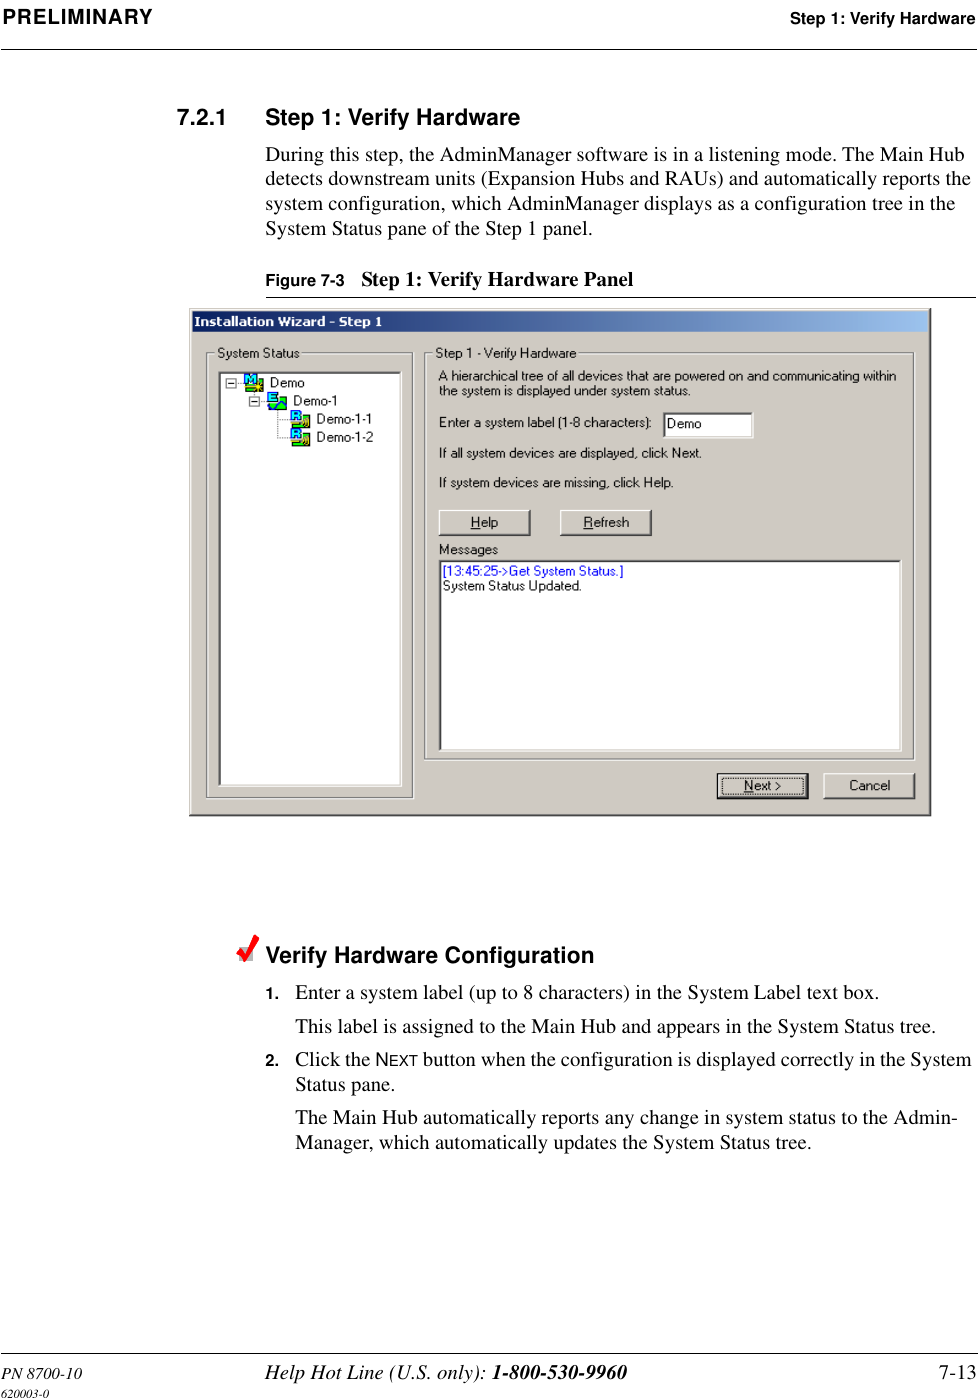 PN 8700-10 Help Hot Line (U.S. only): 1-800-530-9960 7-13620003-0PRELIMINARY Step 1: Verify Hardware7.2.1 Step 1: Verify HardwareDuring this step, the AdminManager software is in a listening mode. The Main Hub detects downstream units (Expansion Hubs and RAUs) and automatically reports the system configuration, which AdminManager displays as a configuration tree in the System Status pane of the Step 1 panel.Figure 7-3 Step 1: Verify Hardware PanelVerify Hardware Configuration1. Enter a system label (up to 8 characters) in the System Label text box.This label is assigned to the Main Hub and appears in the System Status tree.2. Click the NEXT button when the configuration is displayed correctly in the System Status pane.The Main Hub automatically reports any change in system status to the Admin-Manager, which automatically updates the System Status tree.